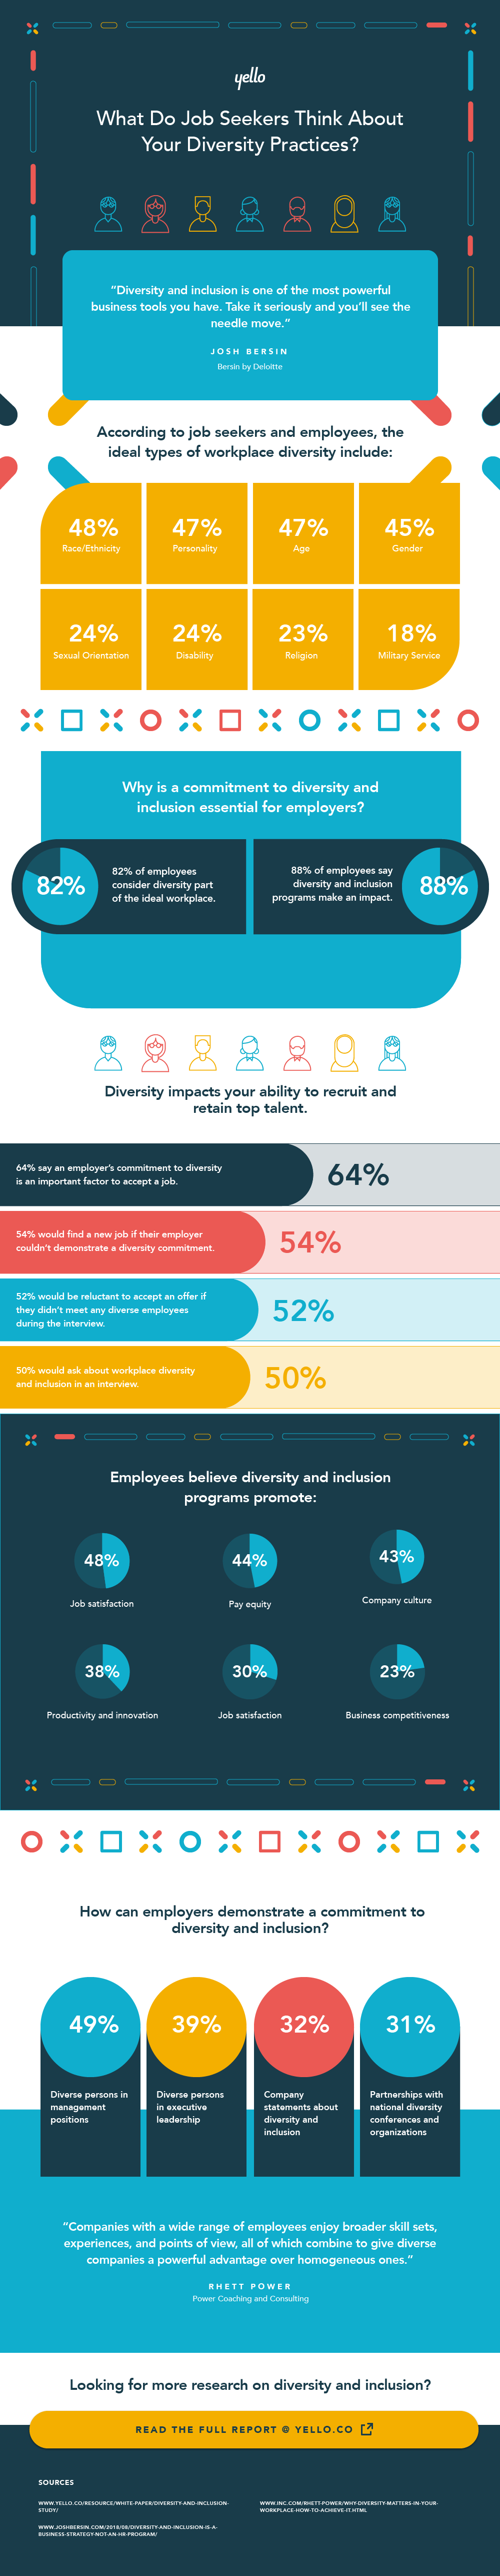 Infographic: What do job seekers think about your diversity practices?